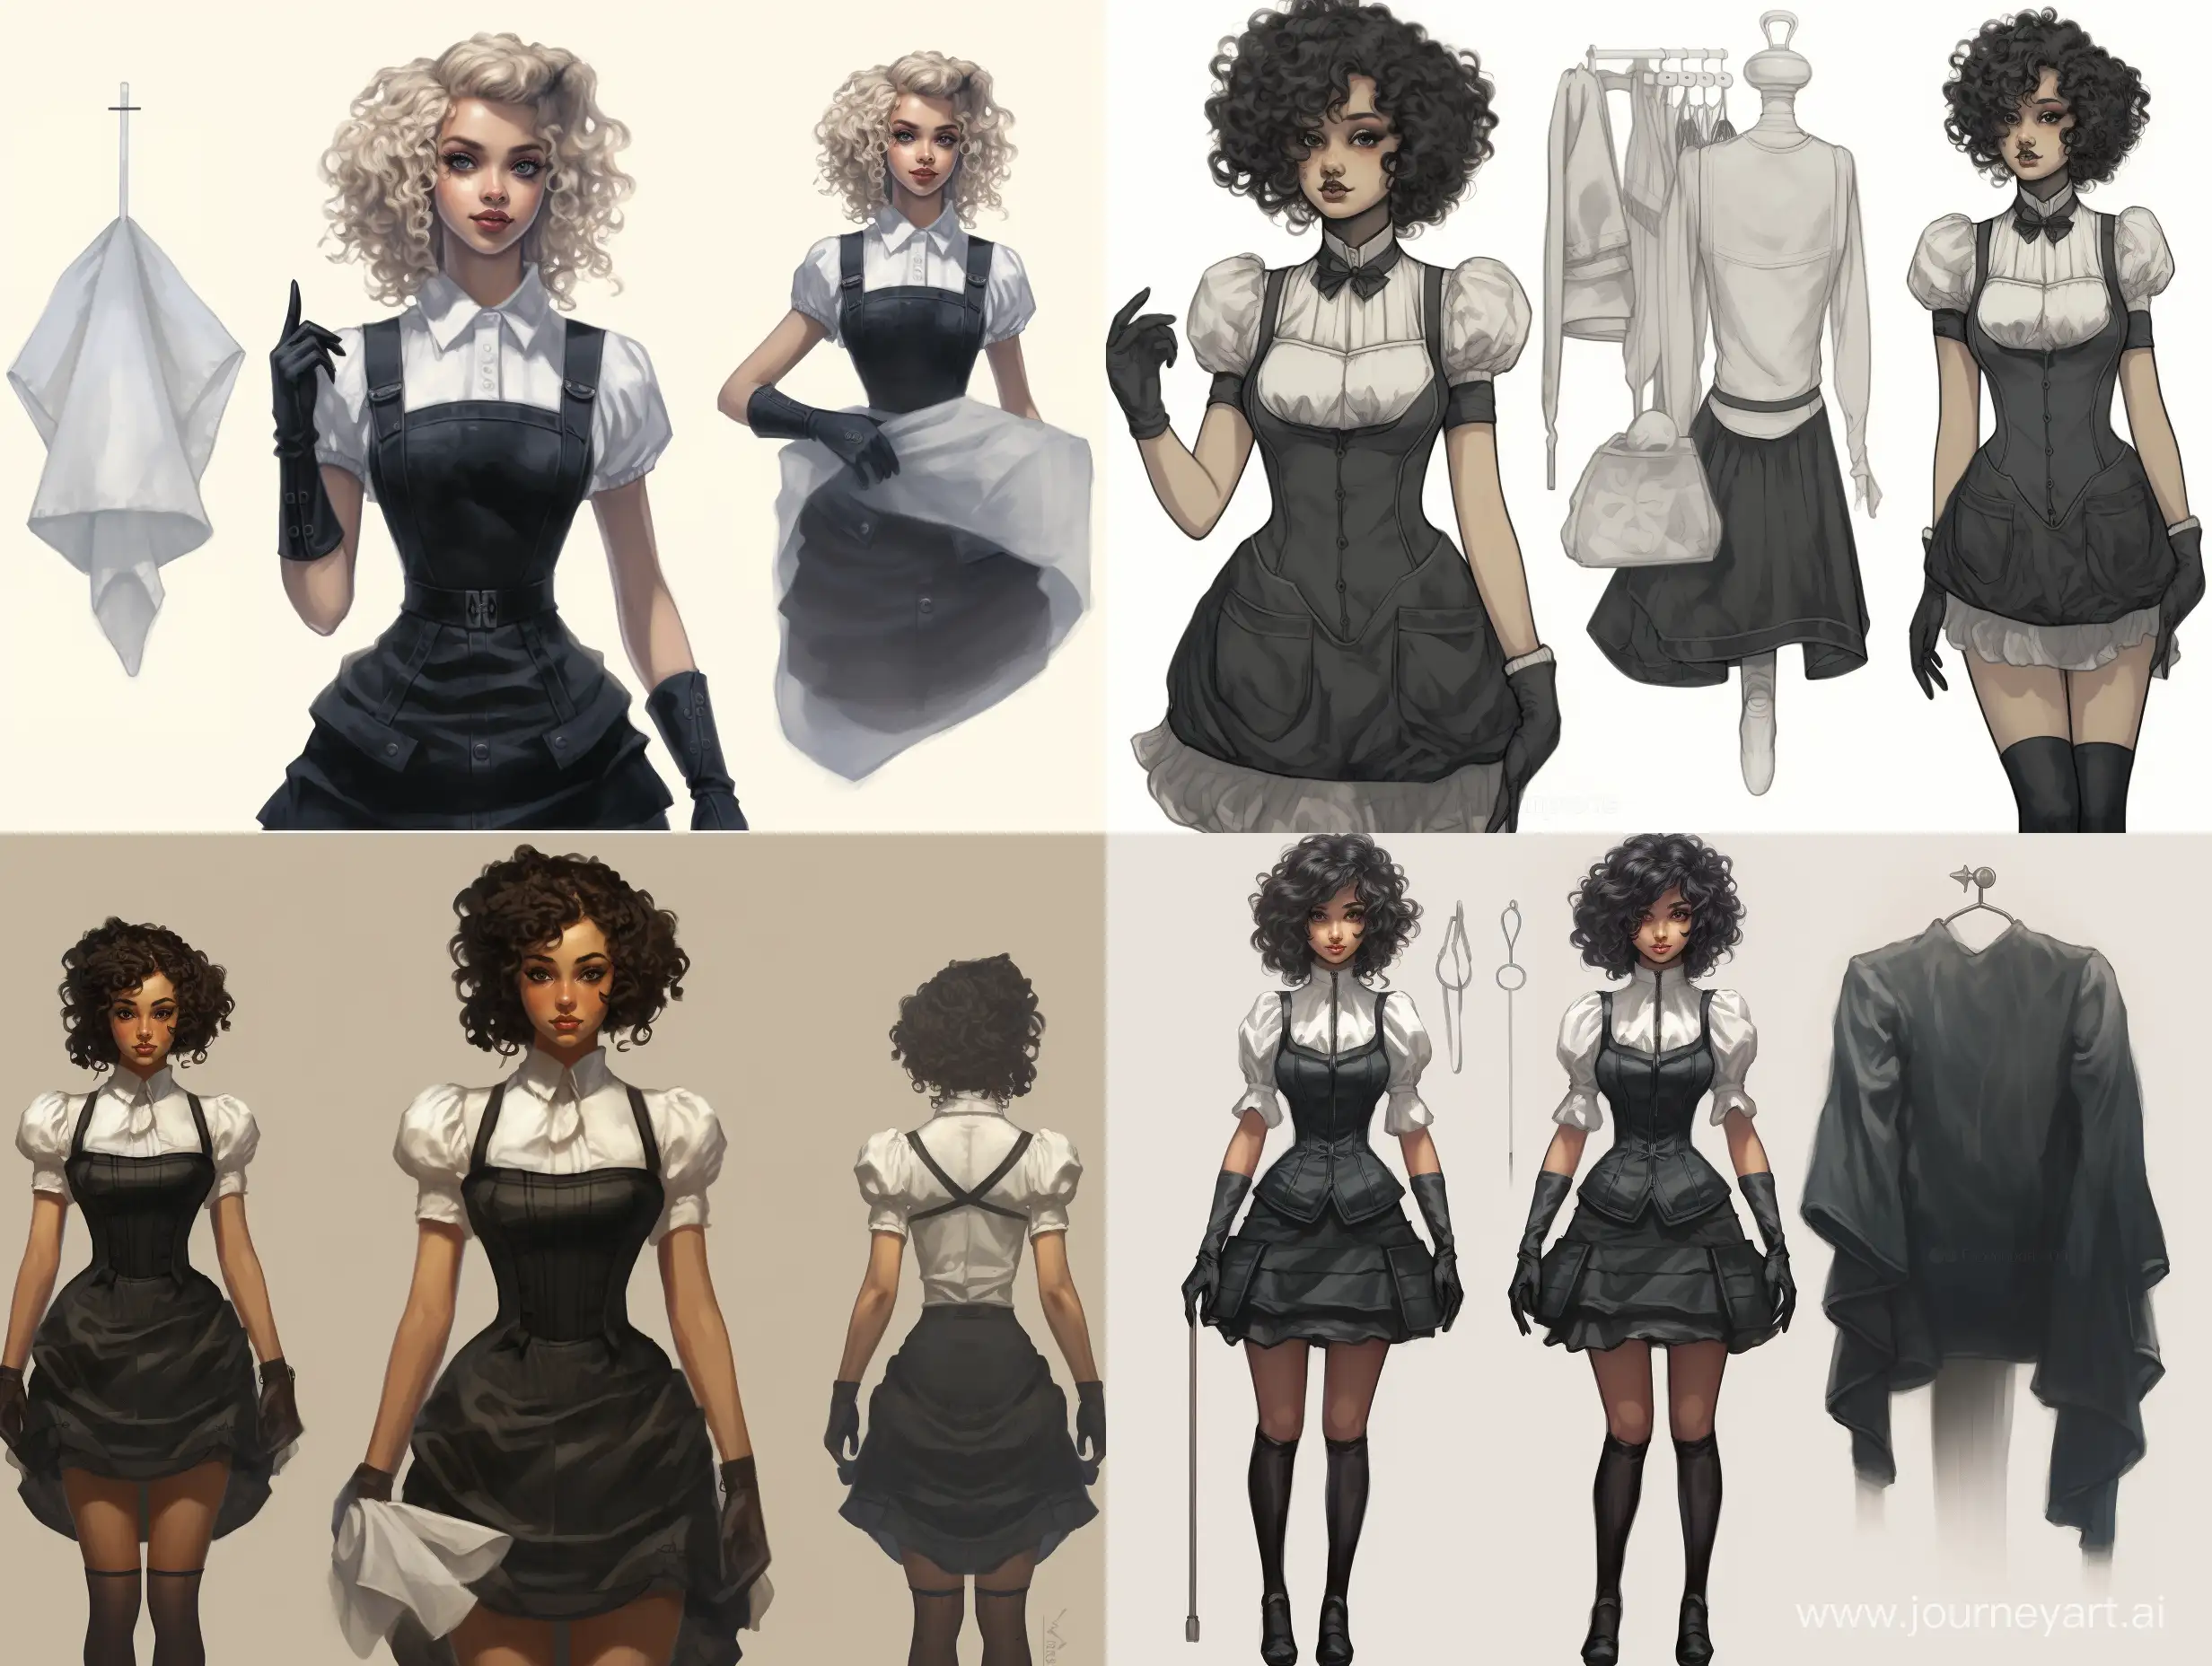 Sensual-Maid-Uniform-Sketch-with-Curly-Hair-Mini-Skirt-and-KneeHighs